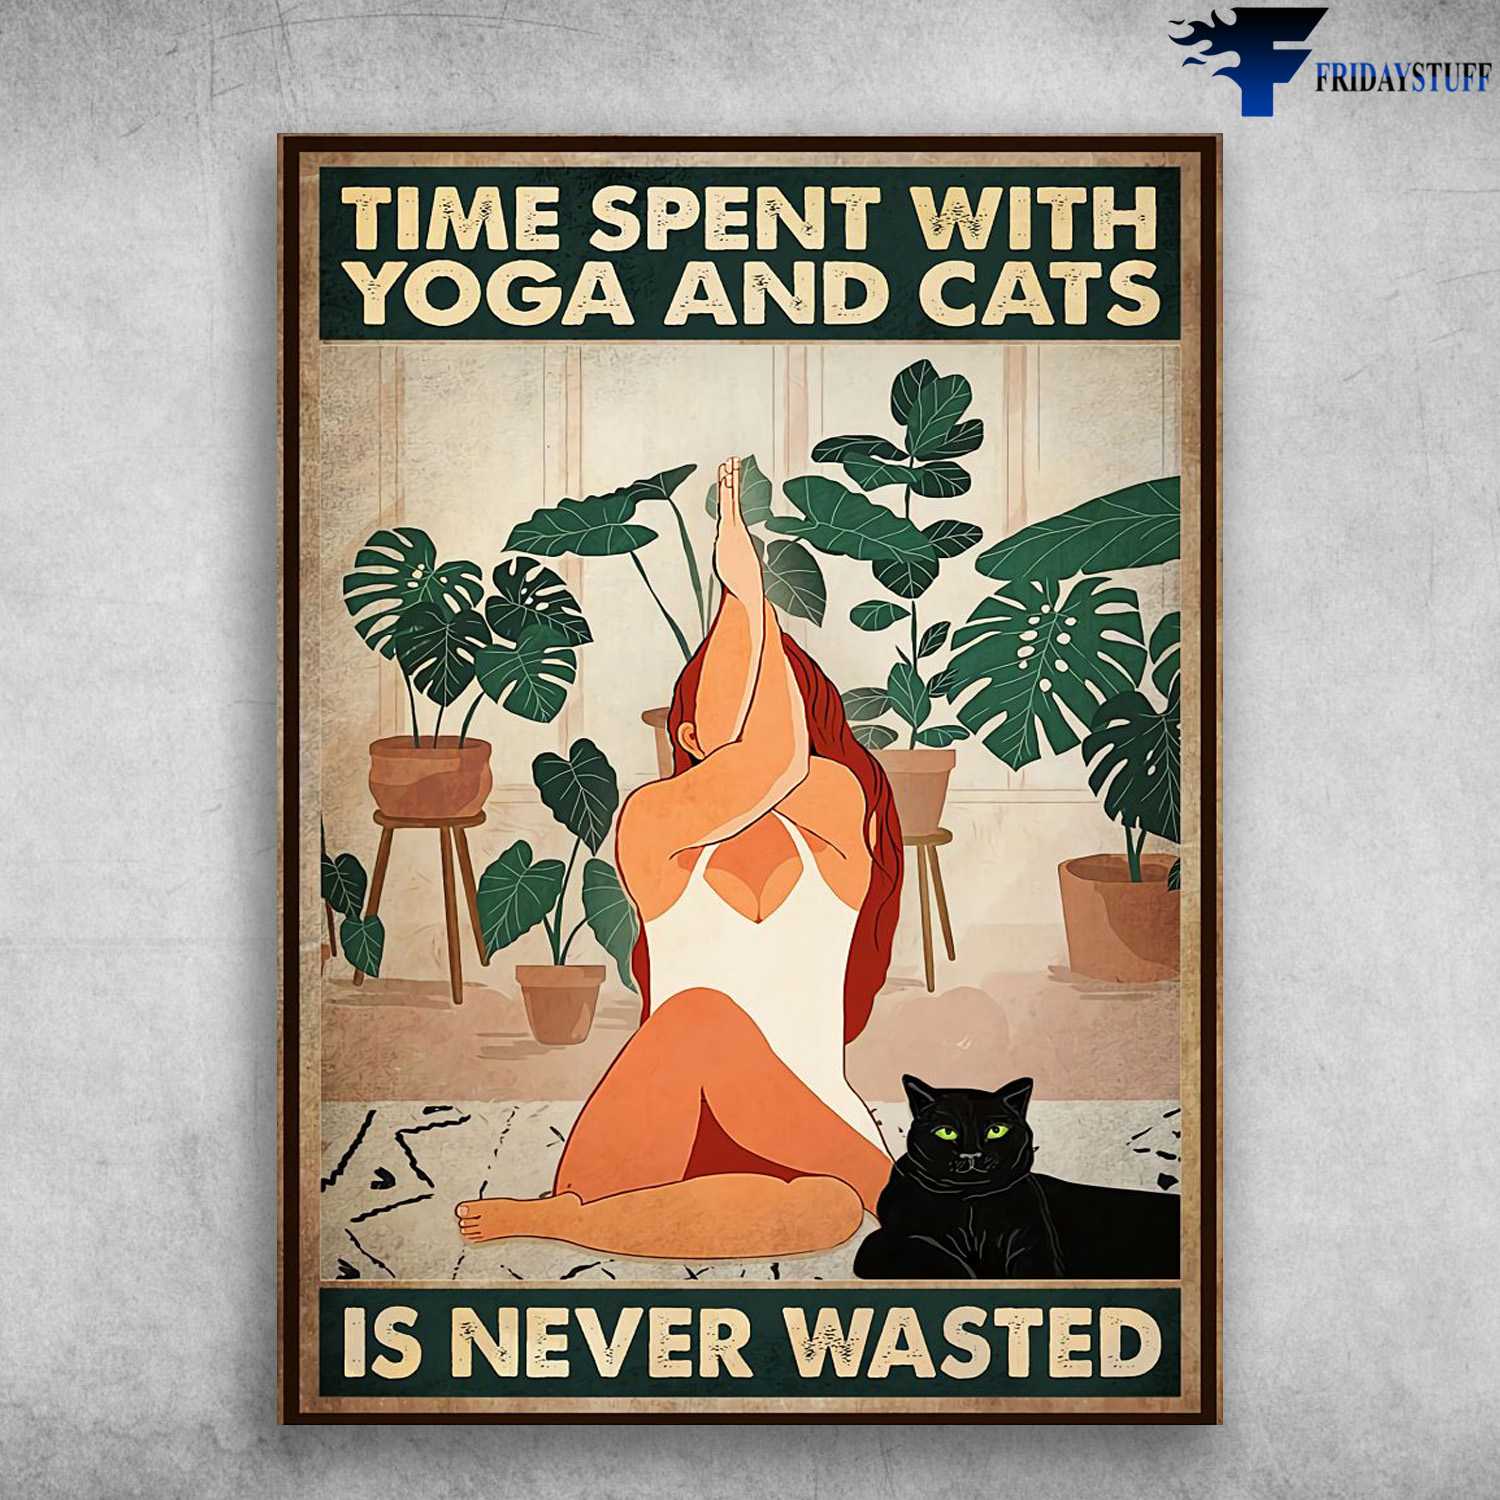 Yoga Girl, Yoga And Cat - Time Spent With Yoga And Cats, Is Never Wasted, Black Cat